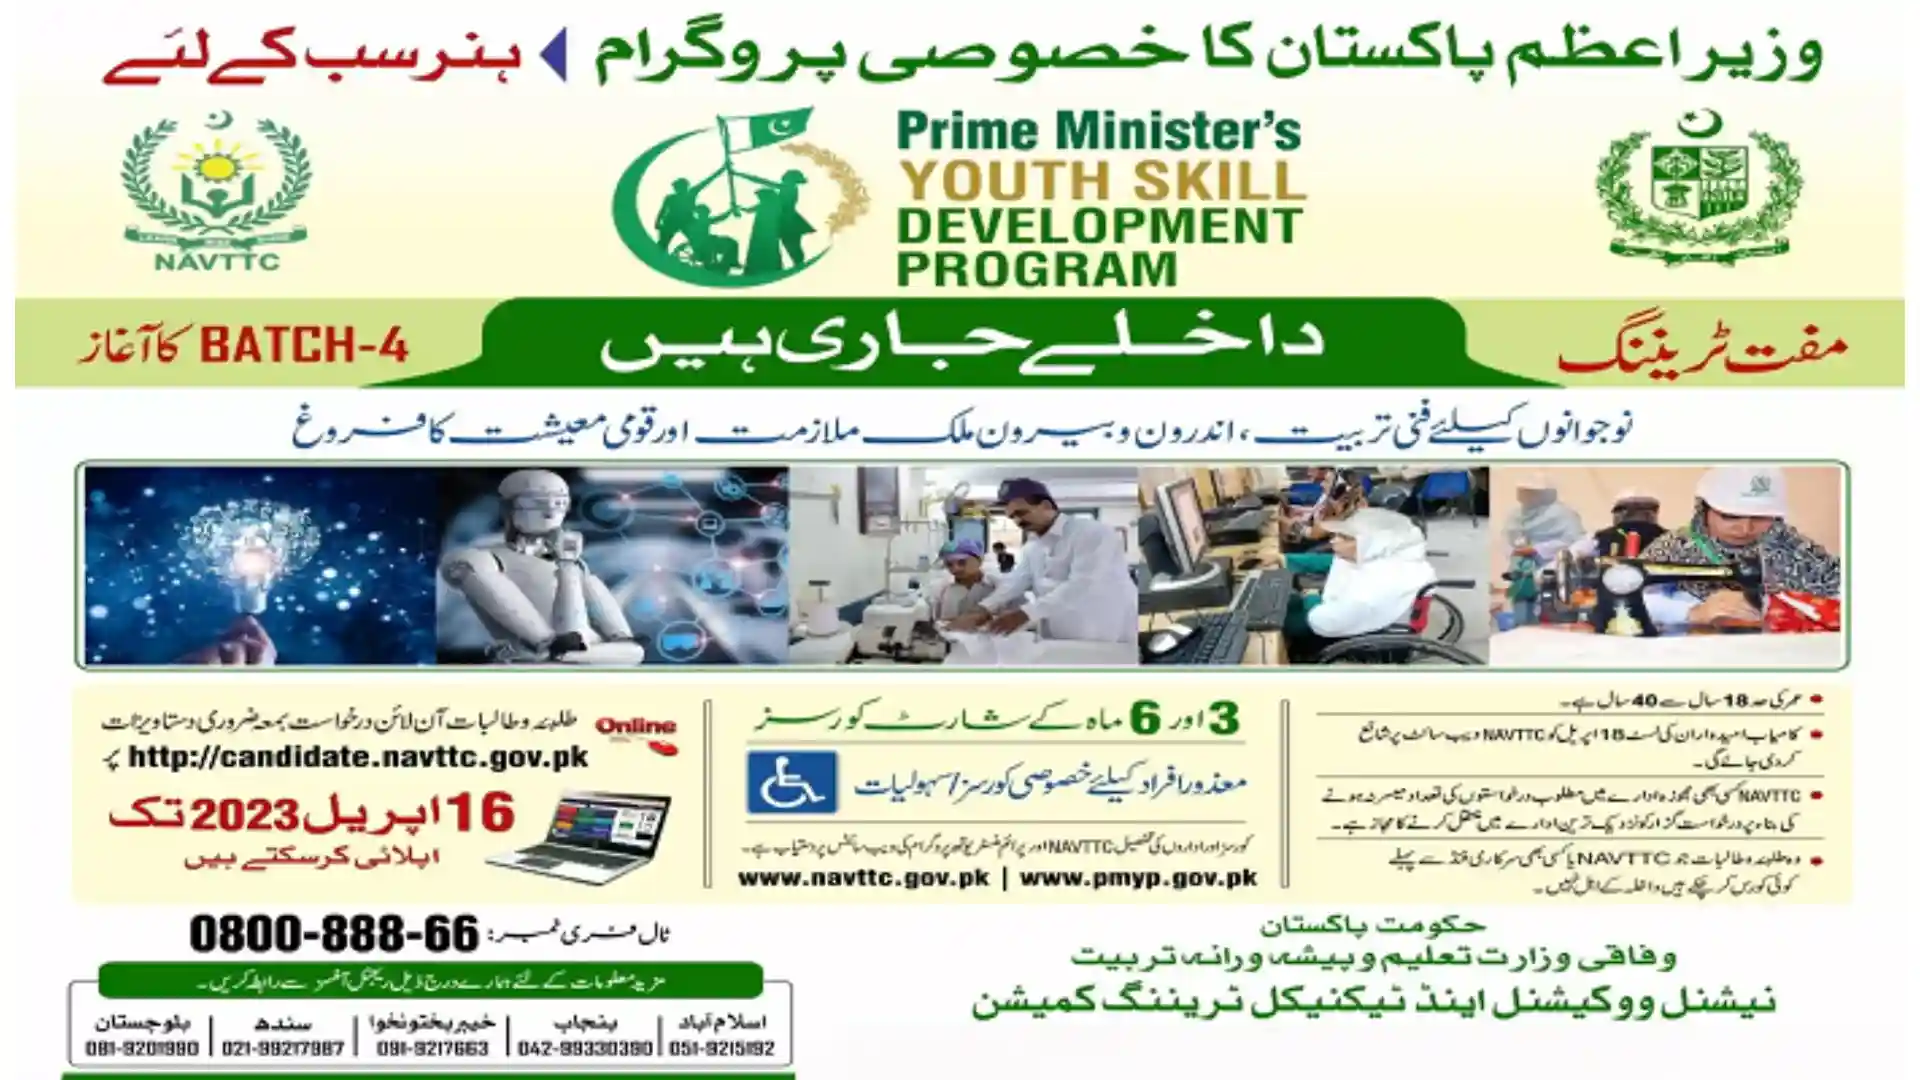 Youth Skill Program by Prime Minister and its objectives